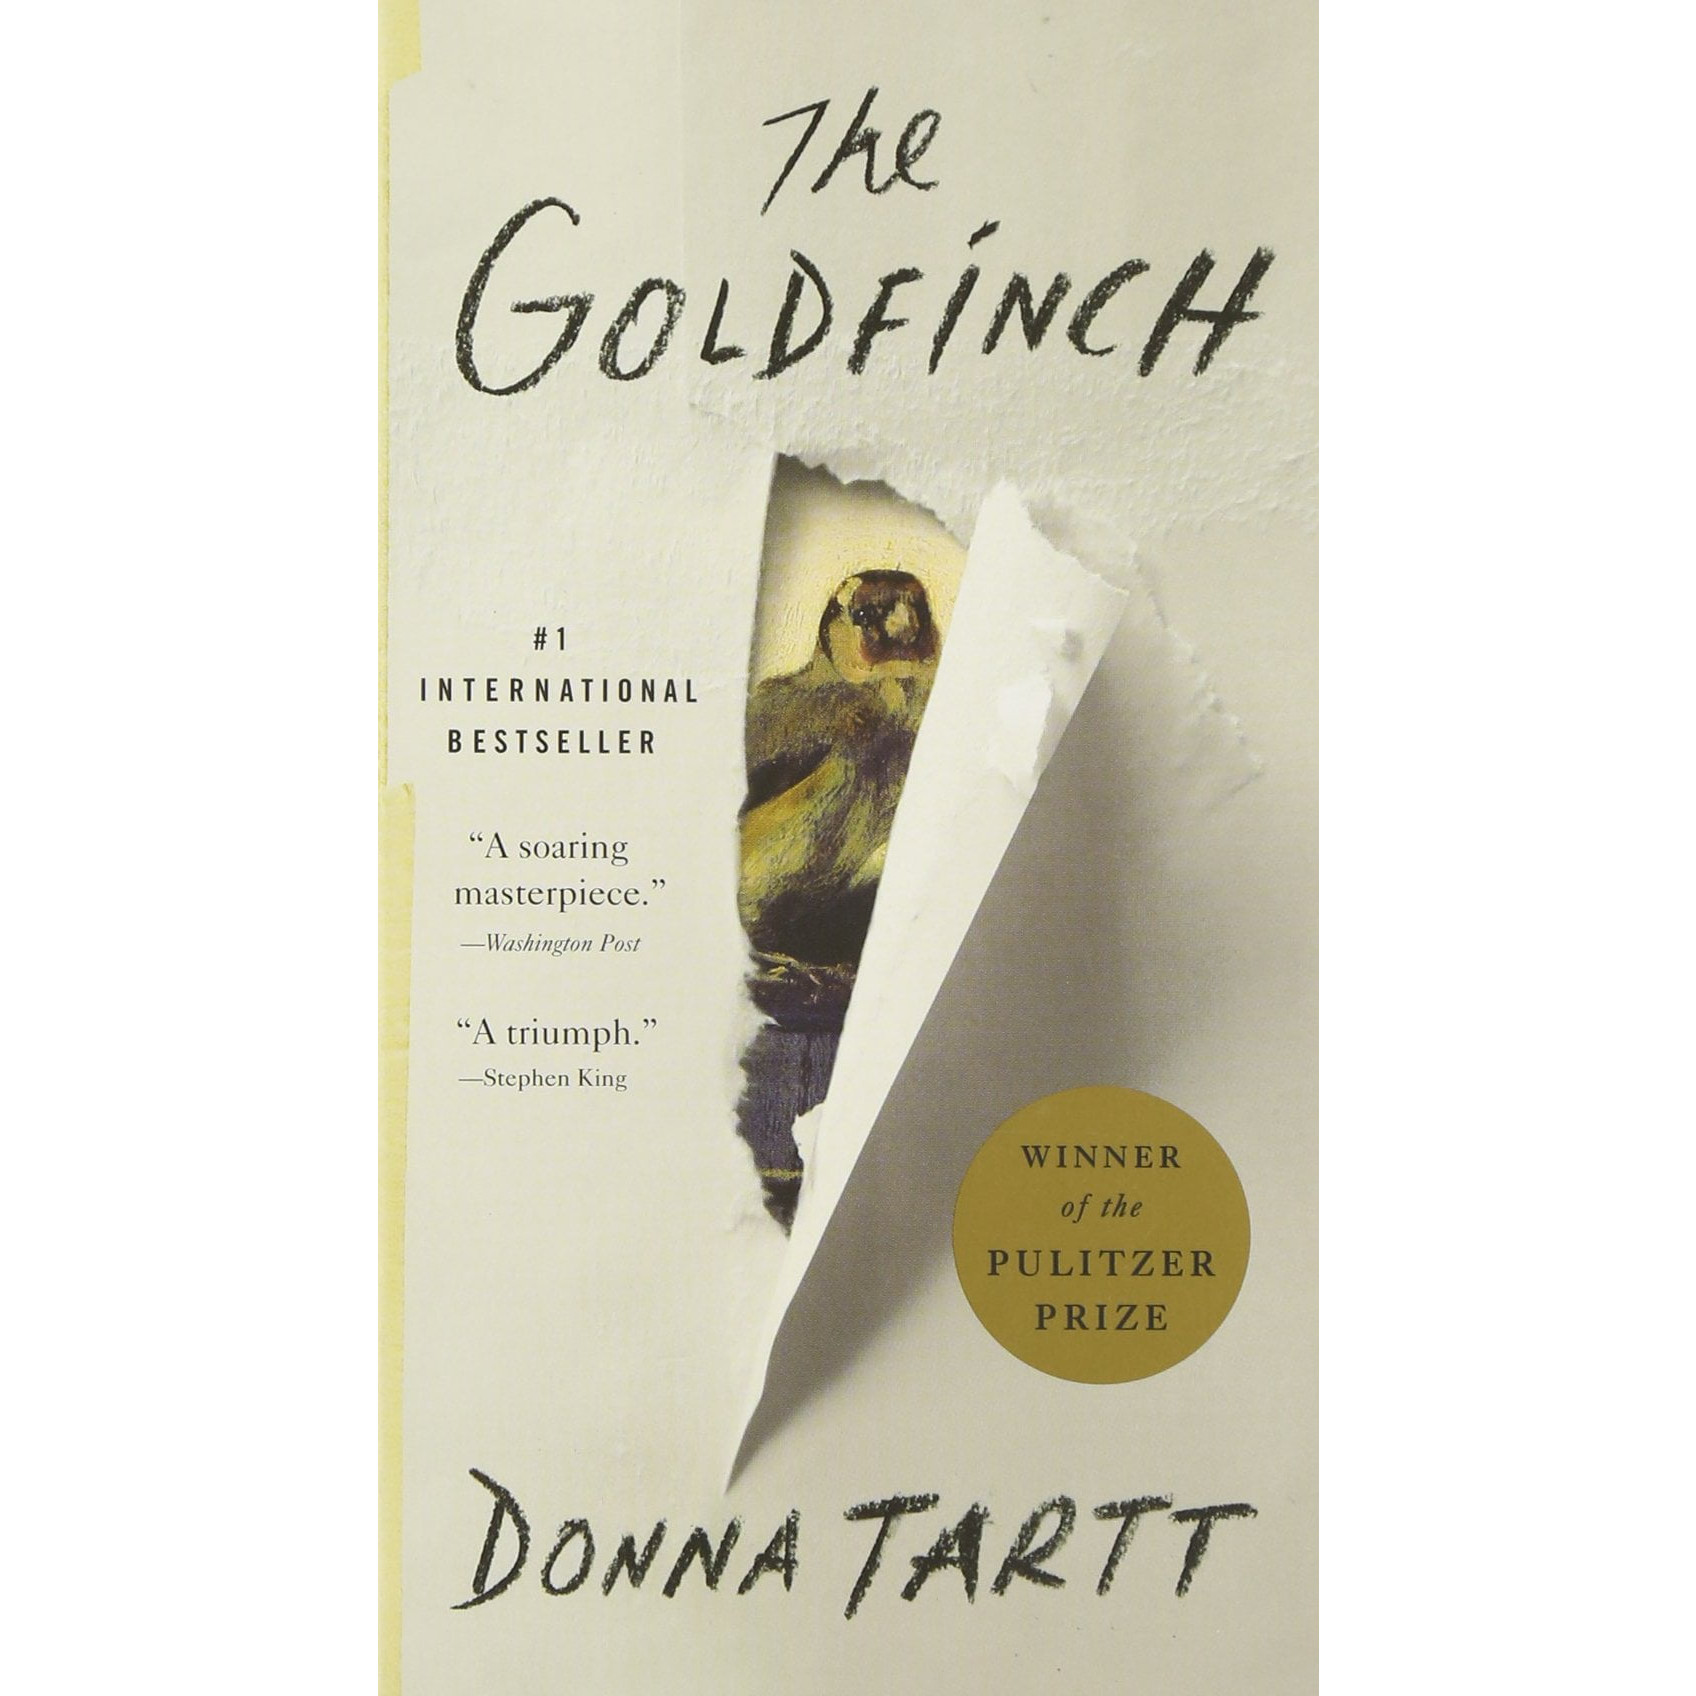 The Goldfinch: A Novel (Pulitzer Prize for Fiction) by Donna Tartt